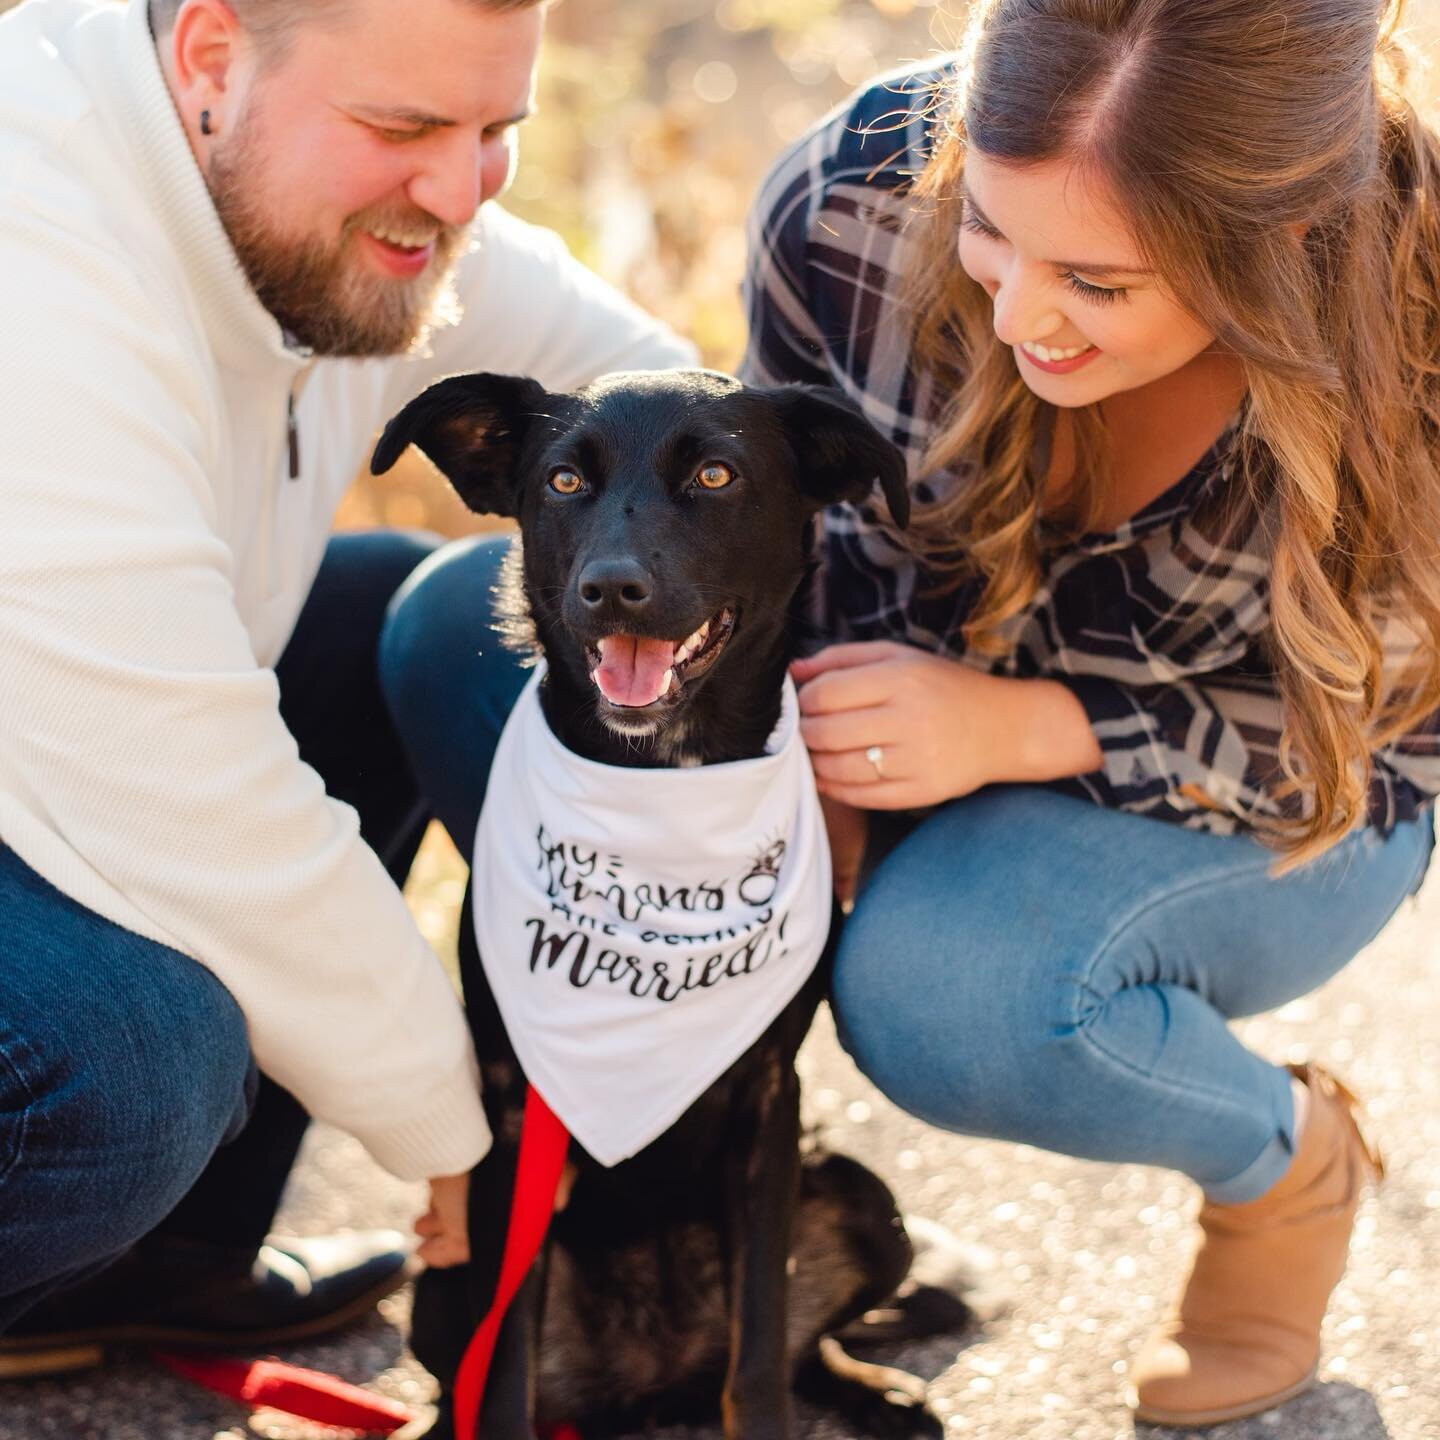 The sweetest engagement pics with a cameo of their pup!! Thank you for sharing Rachel🥰@bauercreativephoto 📷 #engagementphotos #instapuppy #bridetobe #softmakeup #engagementmakeup #makeup #nautralbeauty #natural #mnartist #happy #photooftheday #phot